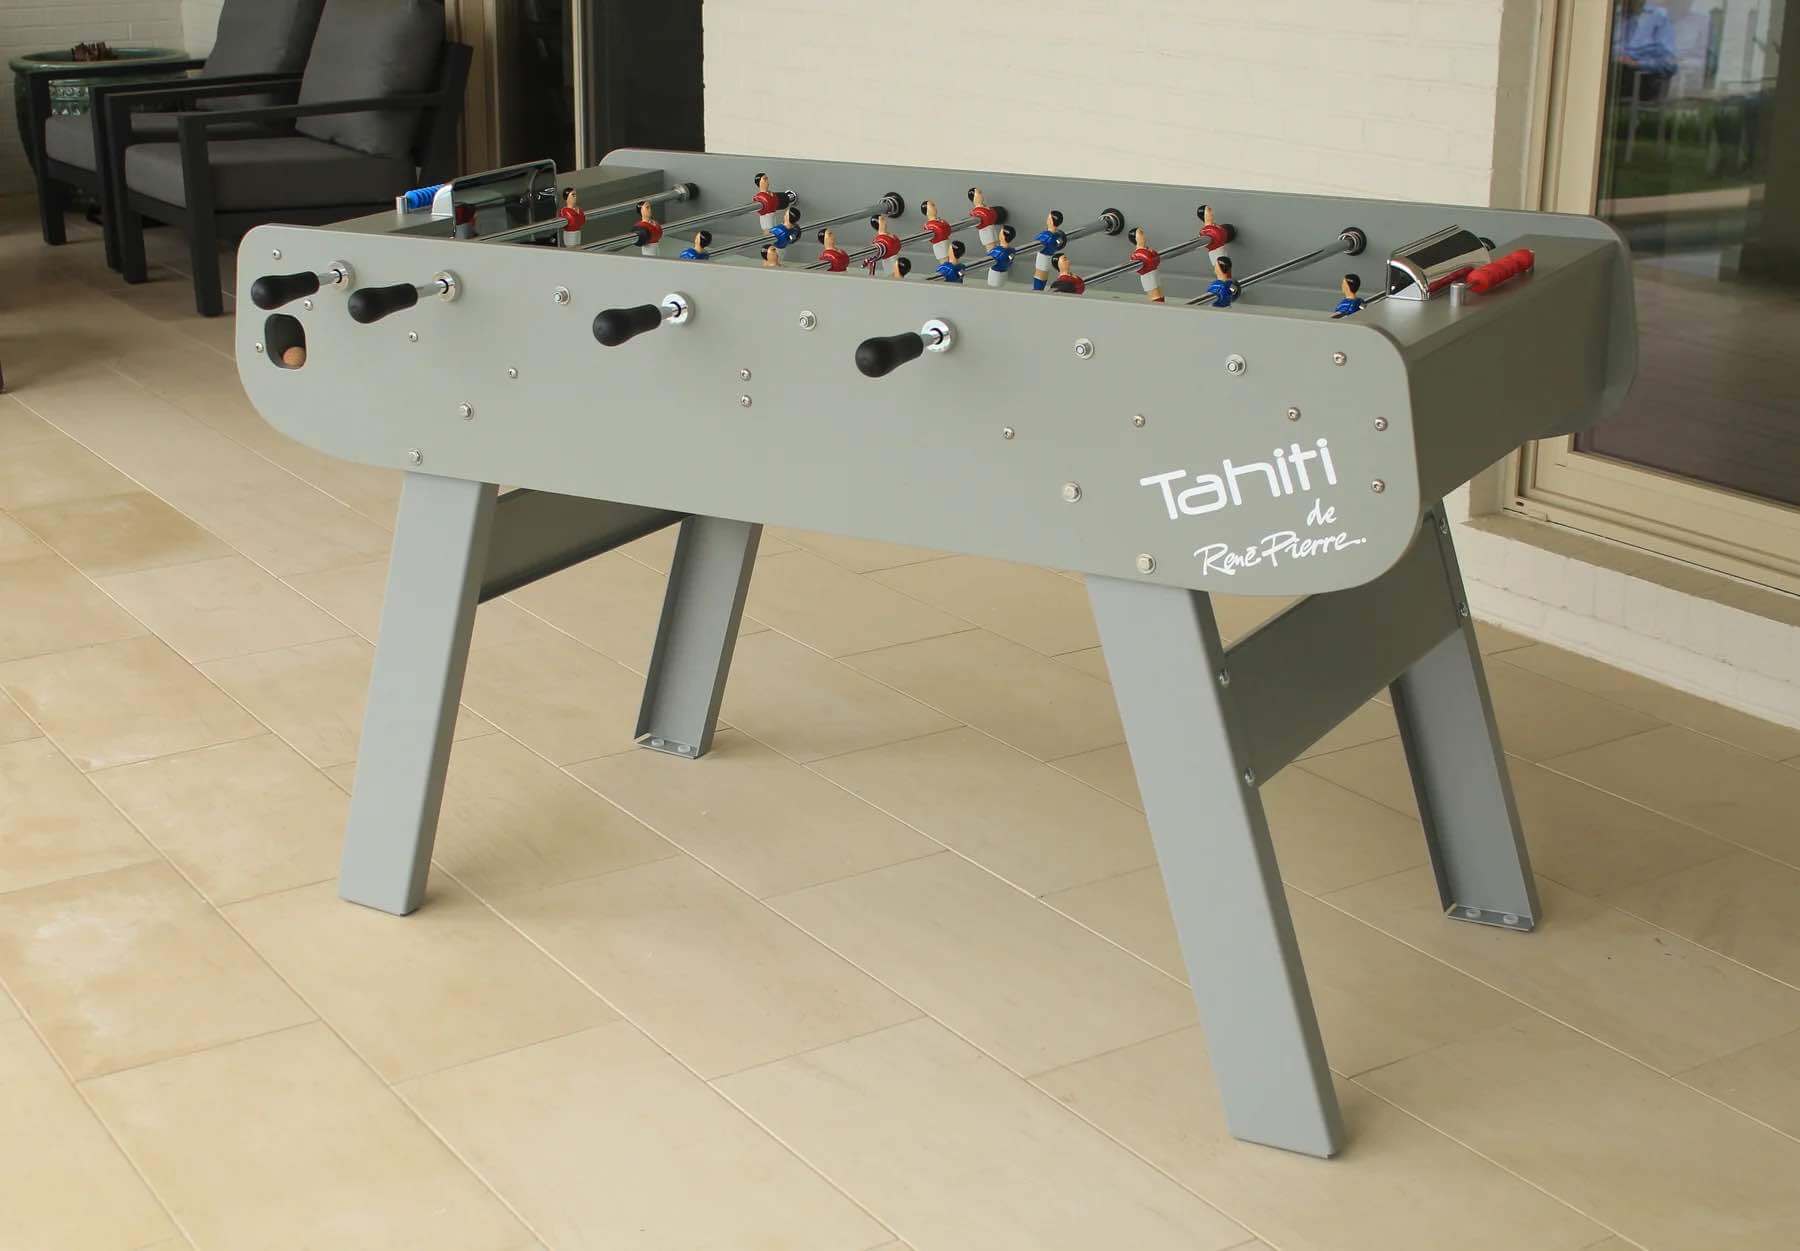 Kettler USA RENE PIERRE TAHITI Outdoor Four-Player Foosball Table, Made In France